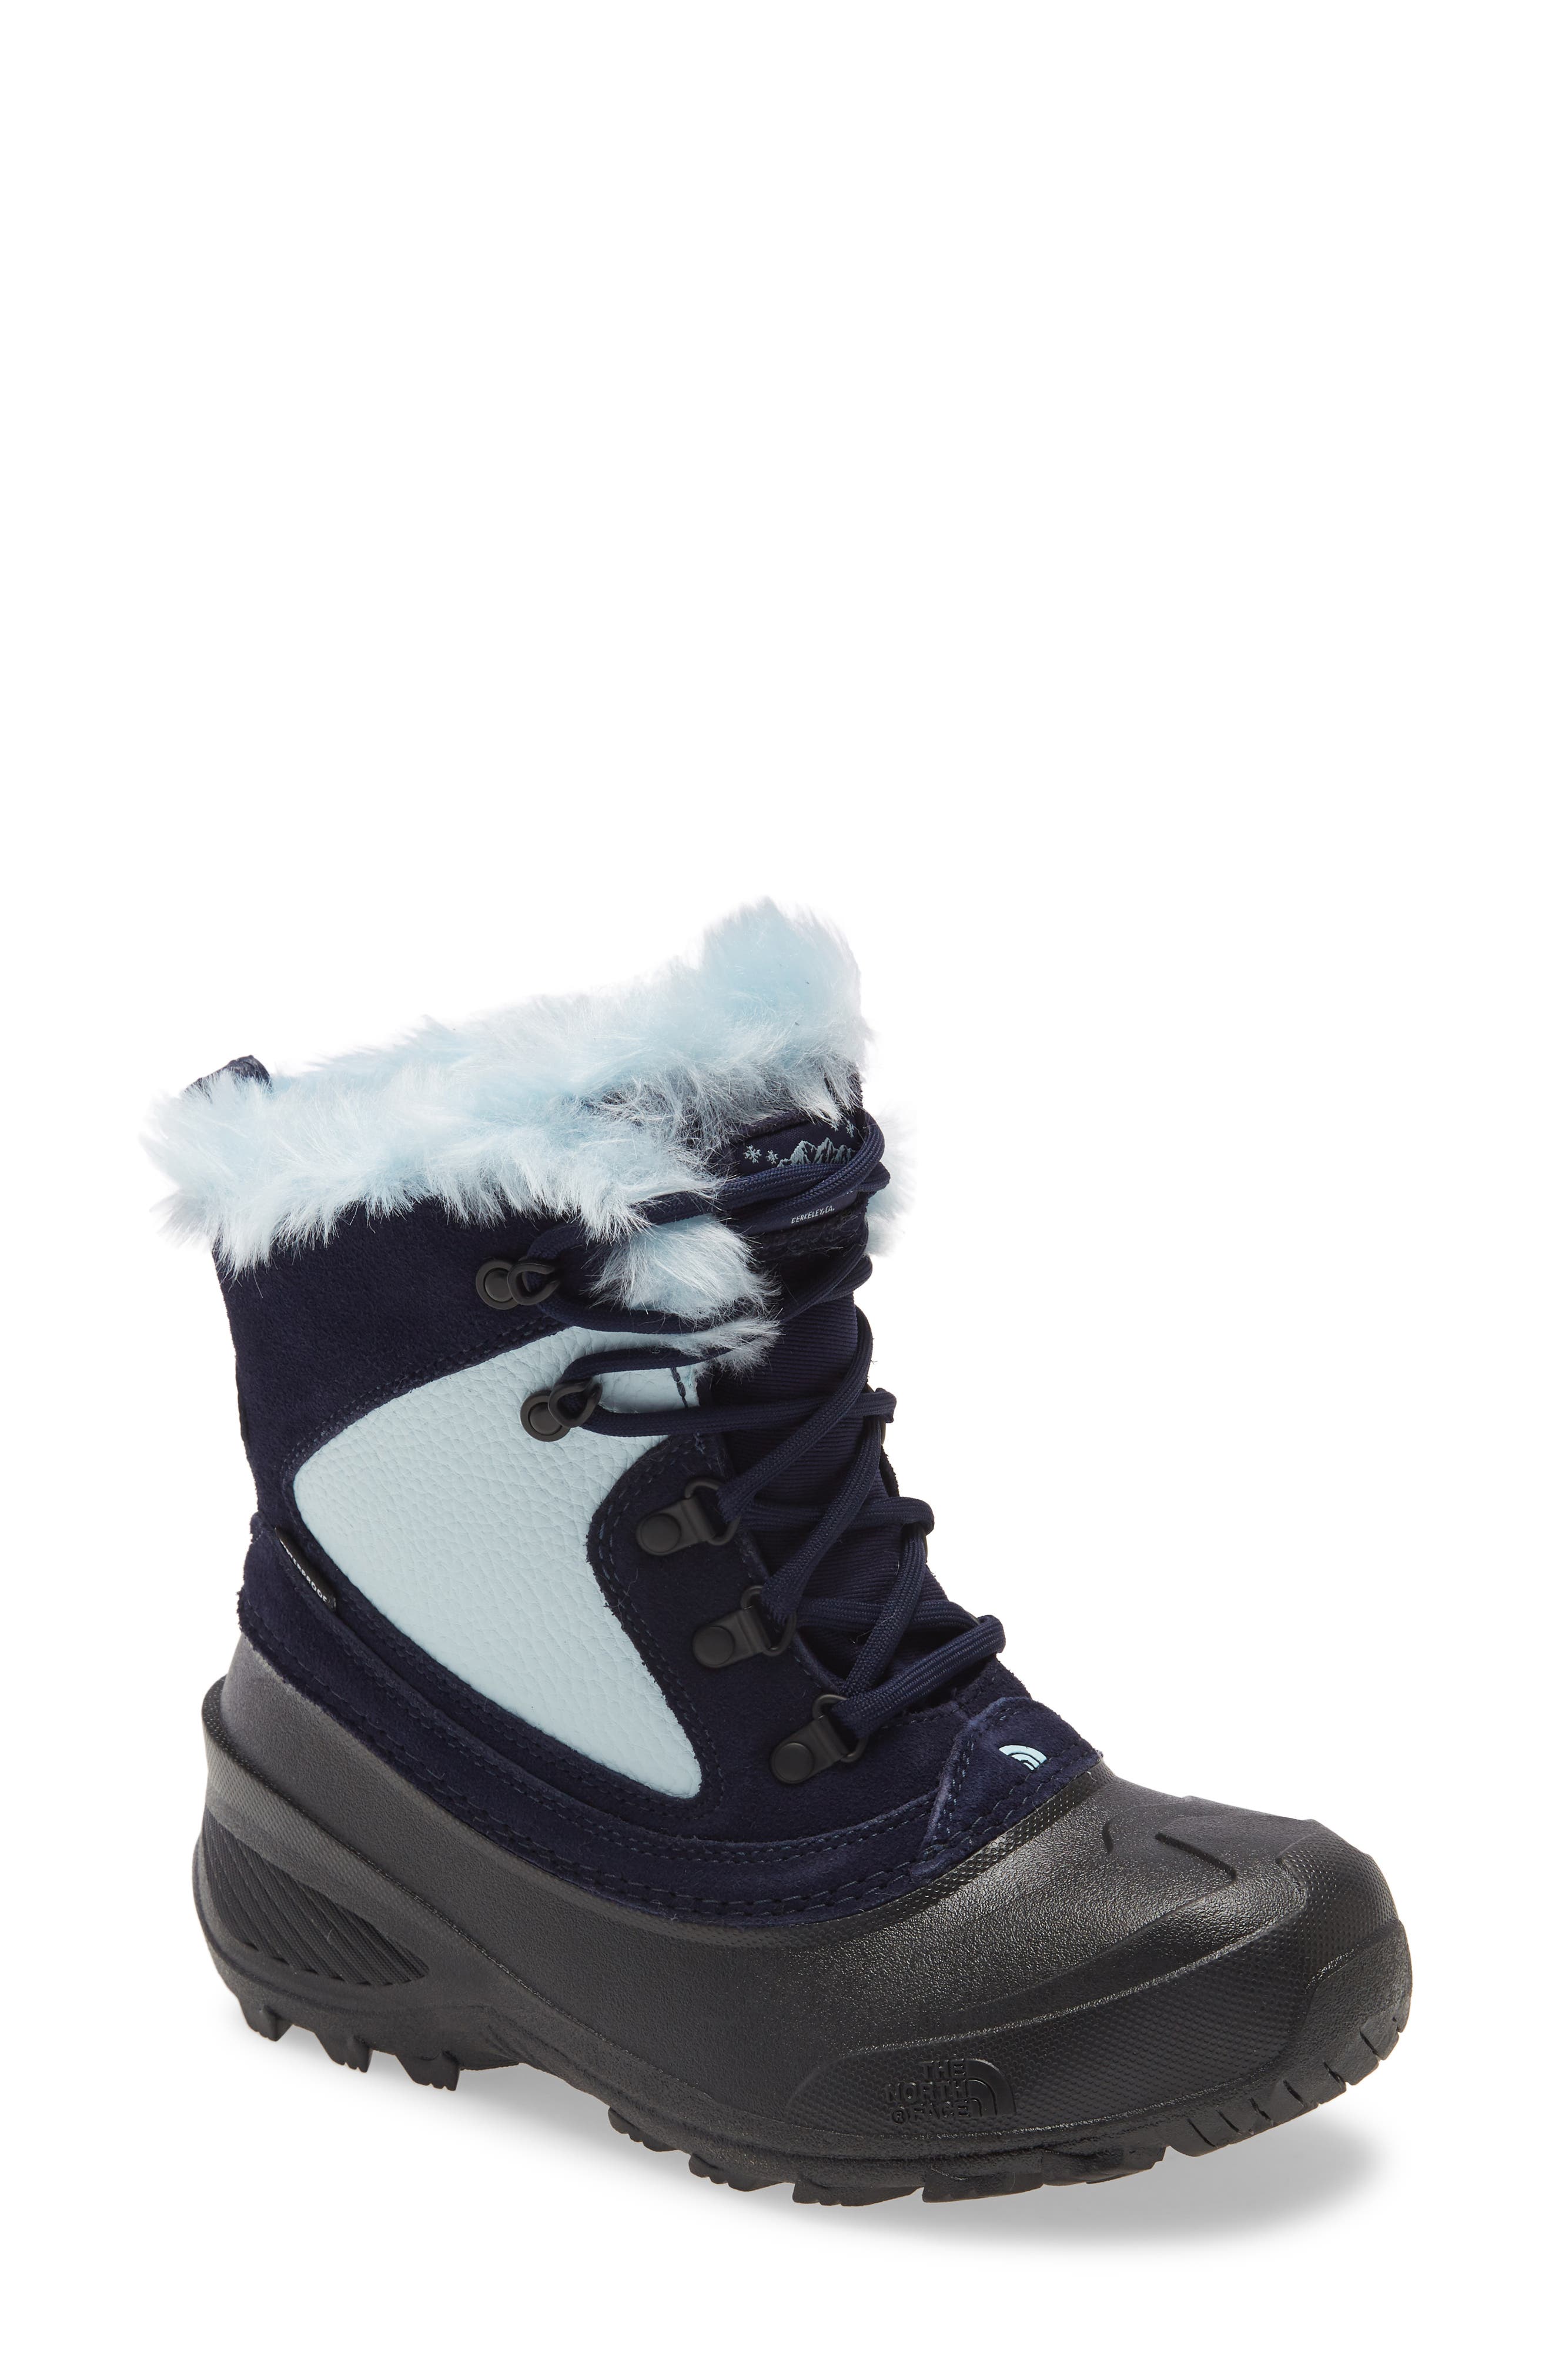 Girls' The North Face Shoes